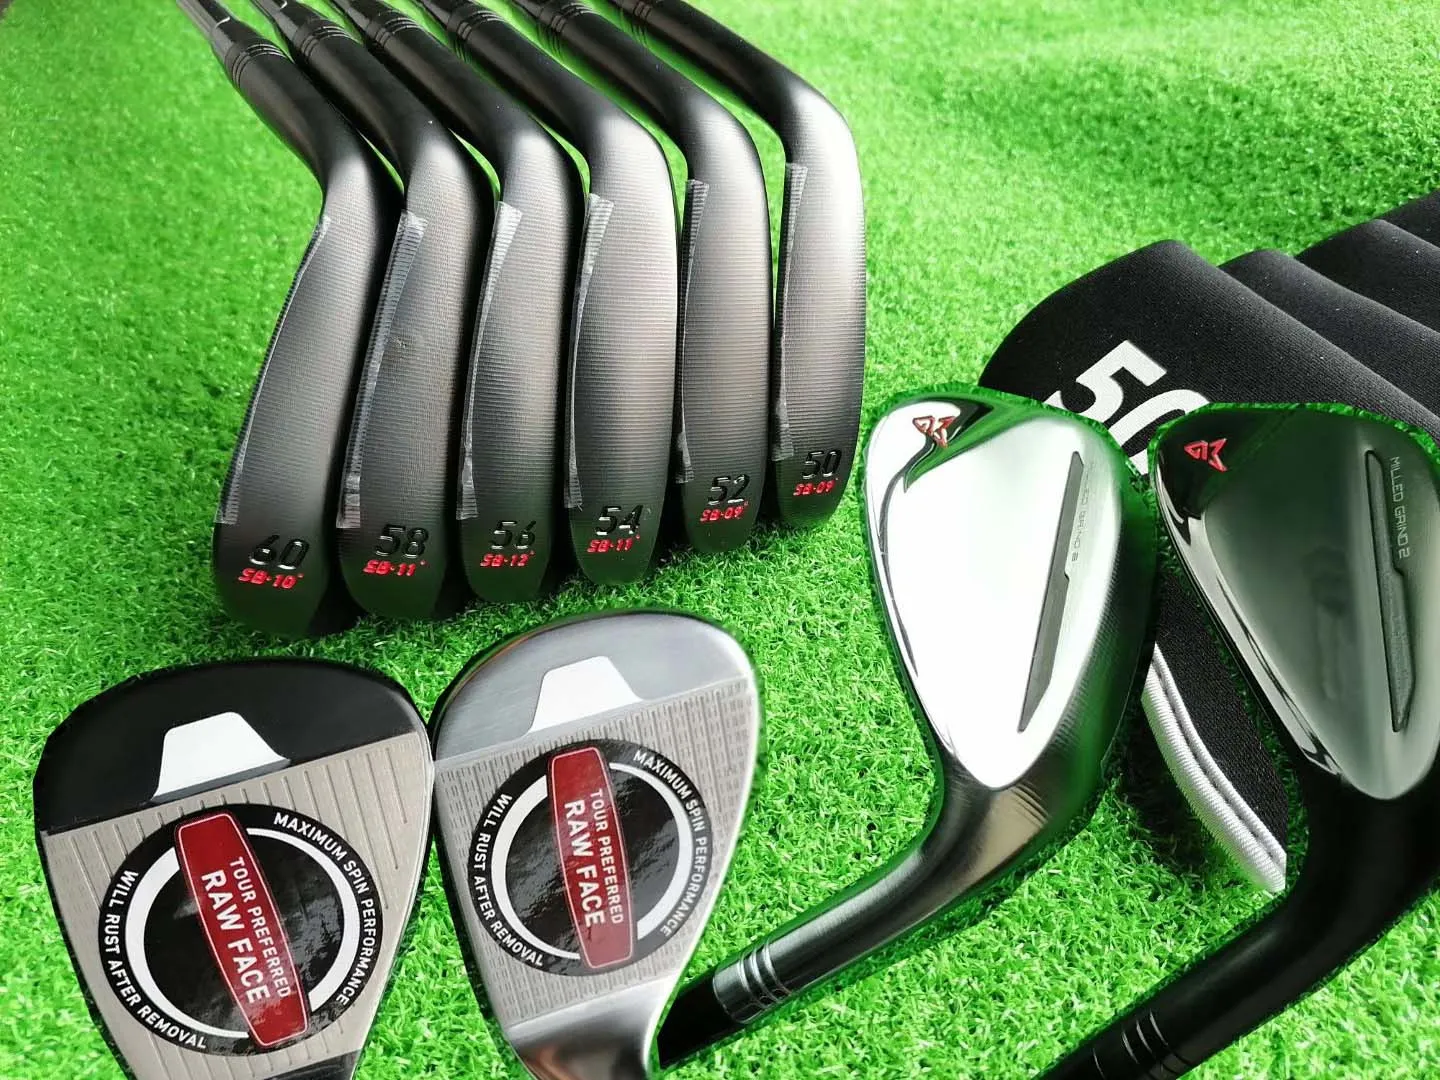 Free DHL Shipping TOP Quality MG2 Golf Wedges Chrome/Black Color 3PCS/LOT 50,52,54,56,58,60 Loft Available Real Pics Contact Seller